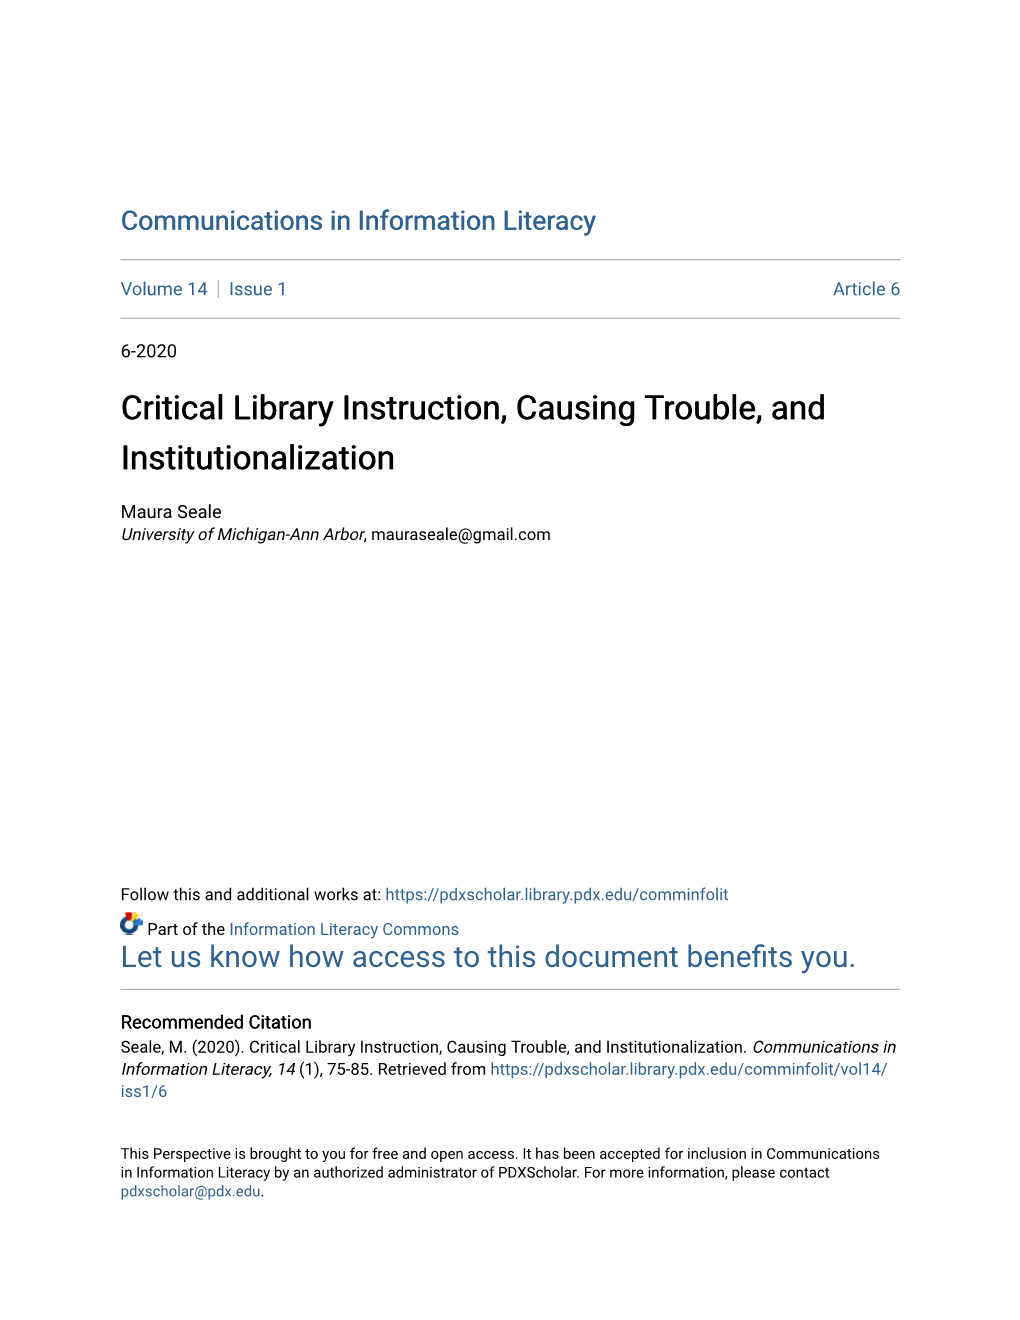 Critical Library Instruction, Causing Trouble, and Institutionalization